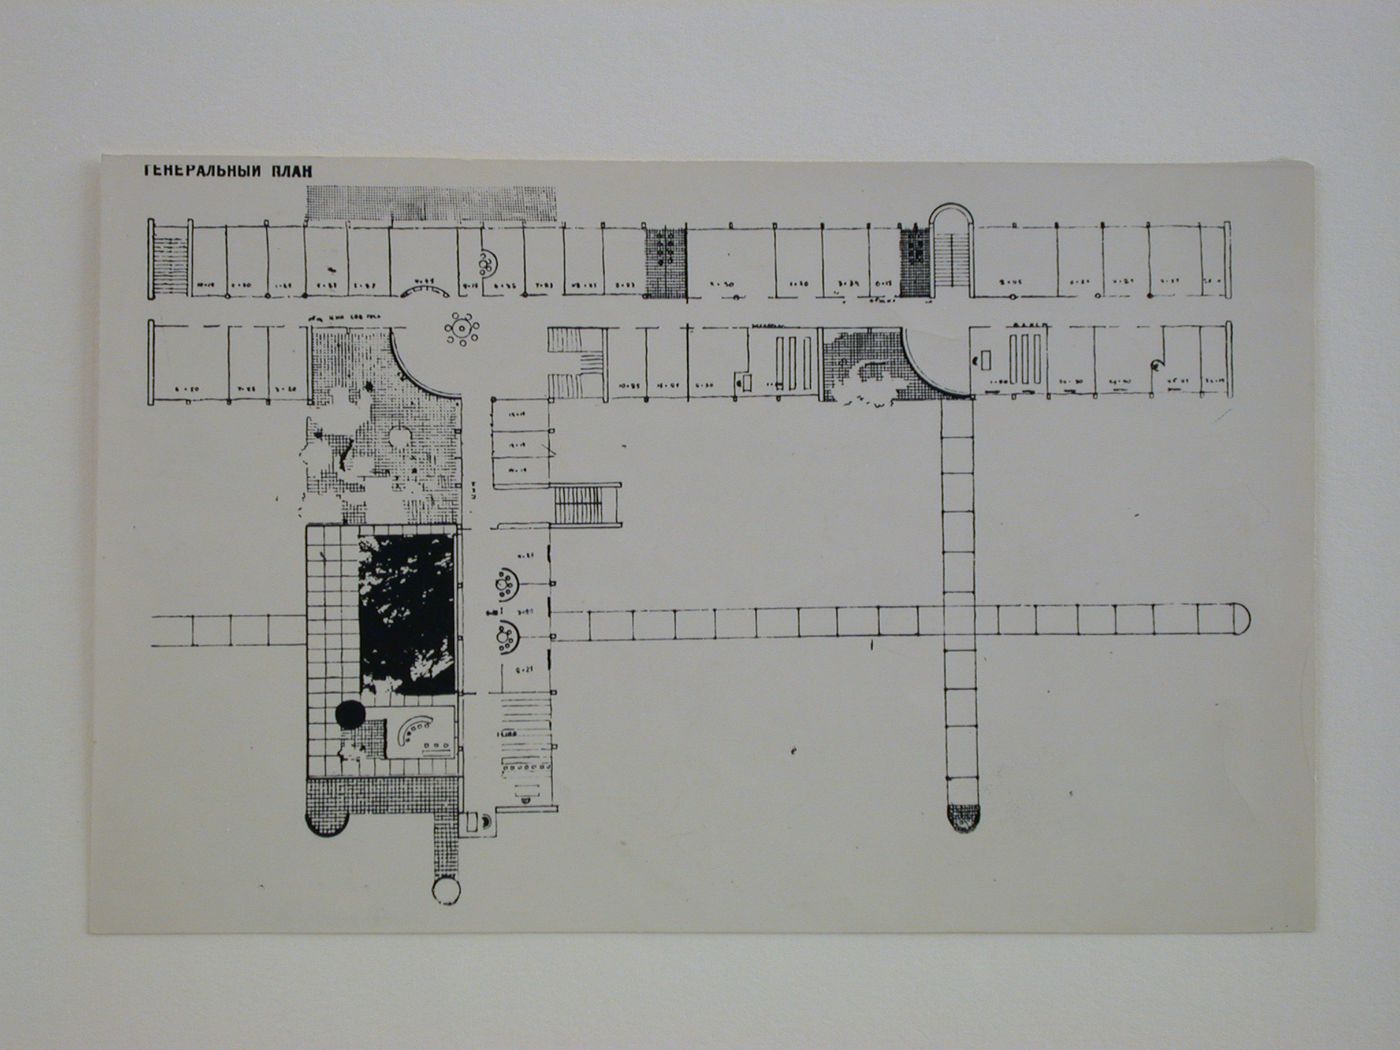 Photograph of a site plan for a government office building competition, Alma-Ata, Soviet Union (now in Kazakhstan)